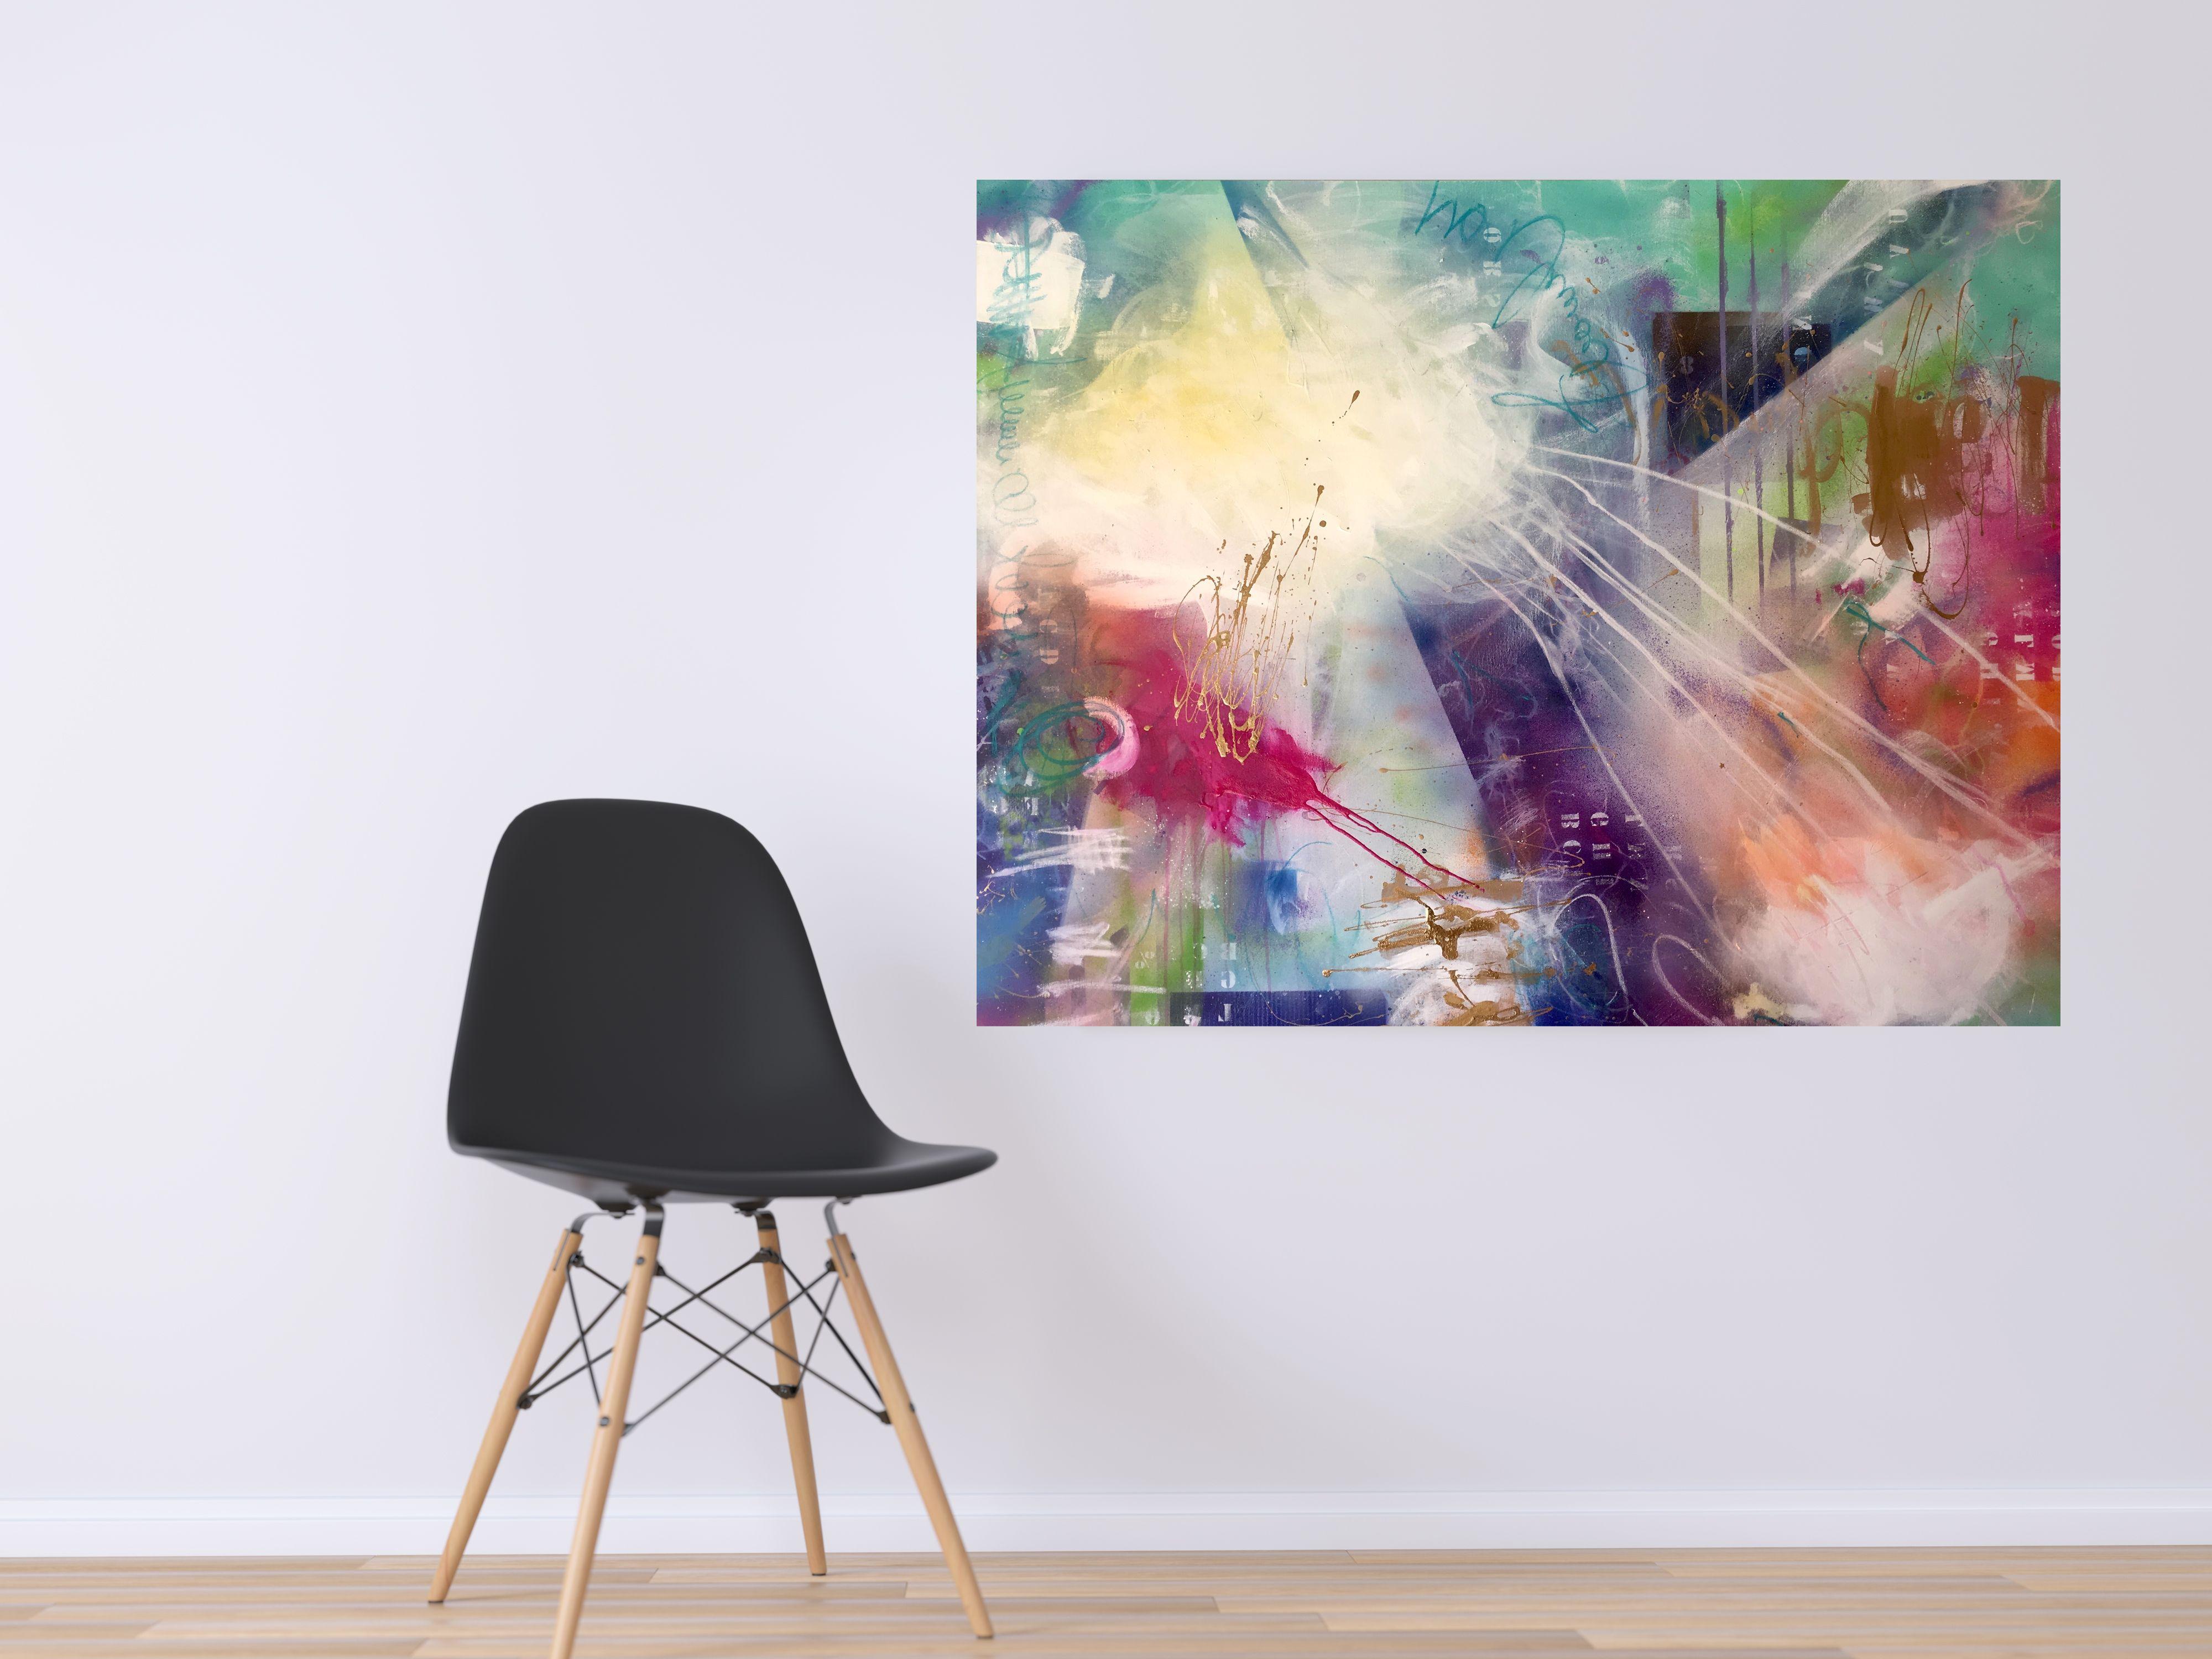 communication is a street art inspired painting sized of 120 cm/47,24 in x 100 cm/39,37 in, 4 cm/1,5 in deep mixed media paintings. The first layer is a geometric spray painting with perspective and surreal spaces in the distance. The following